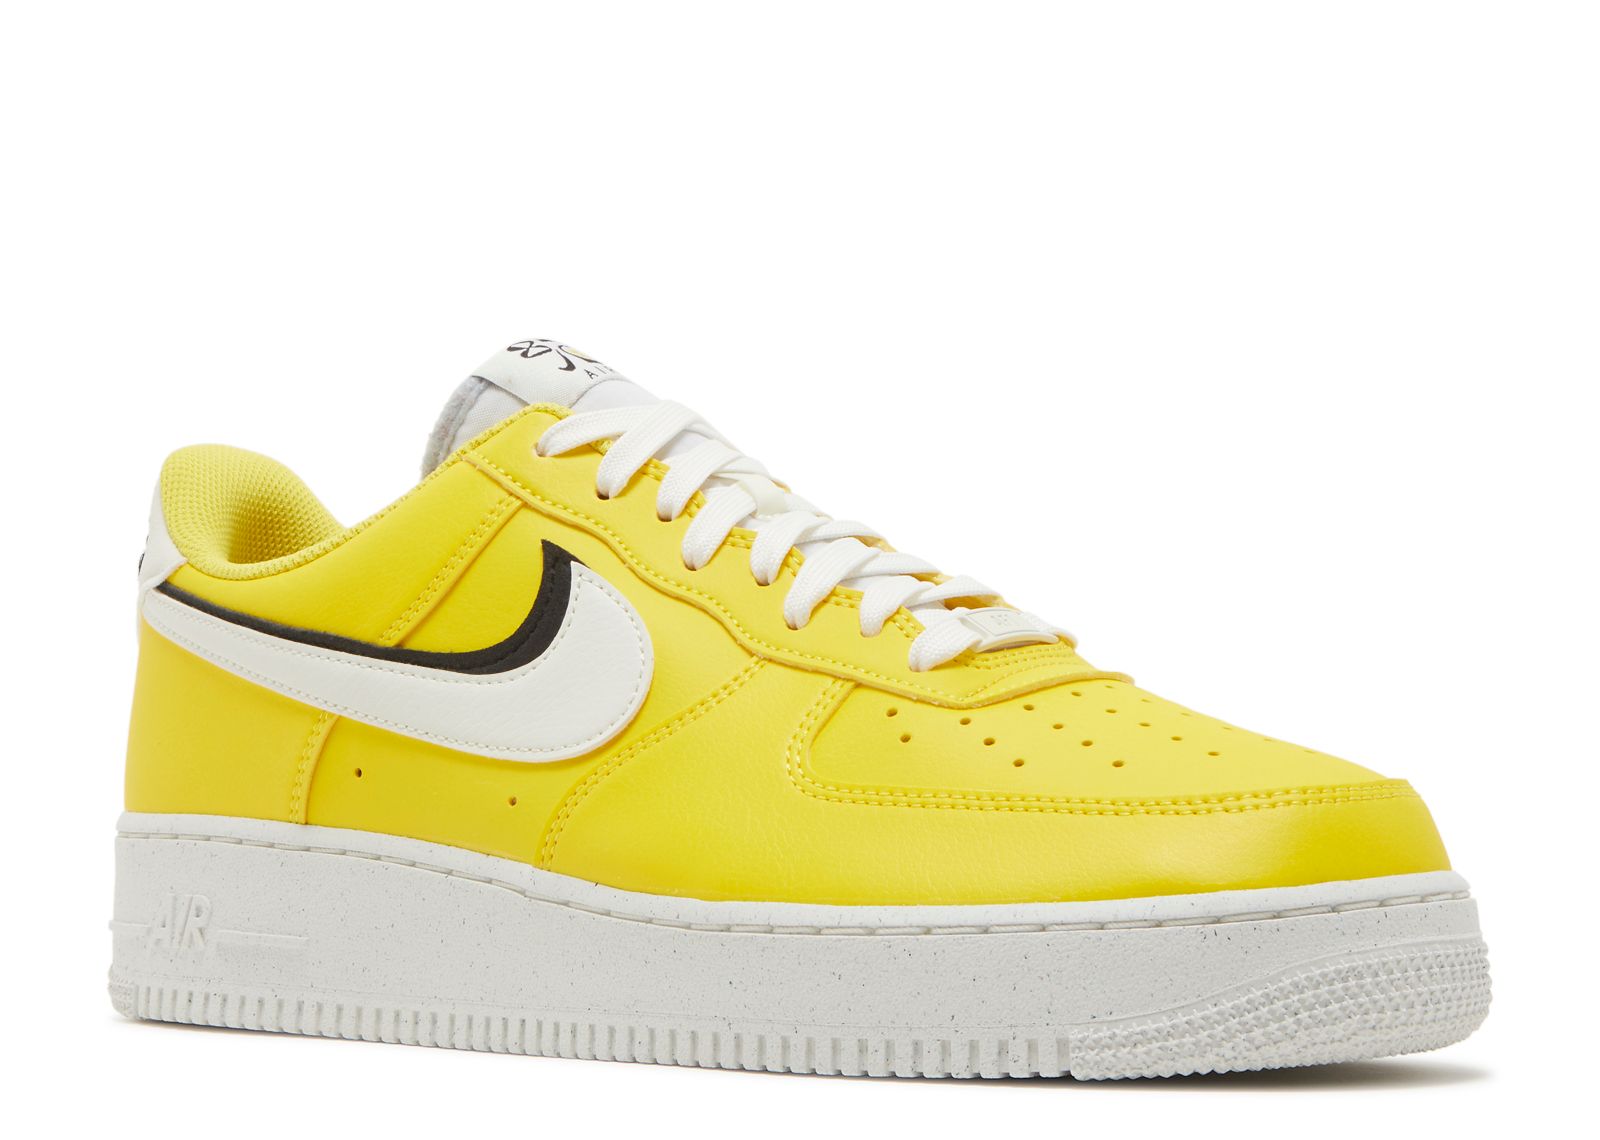 Nike Air Force One LV '07 Yellow Stock Photo